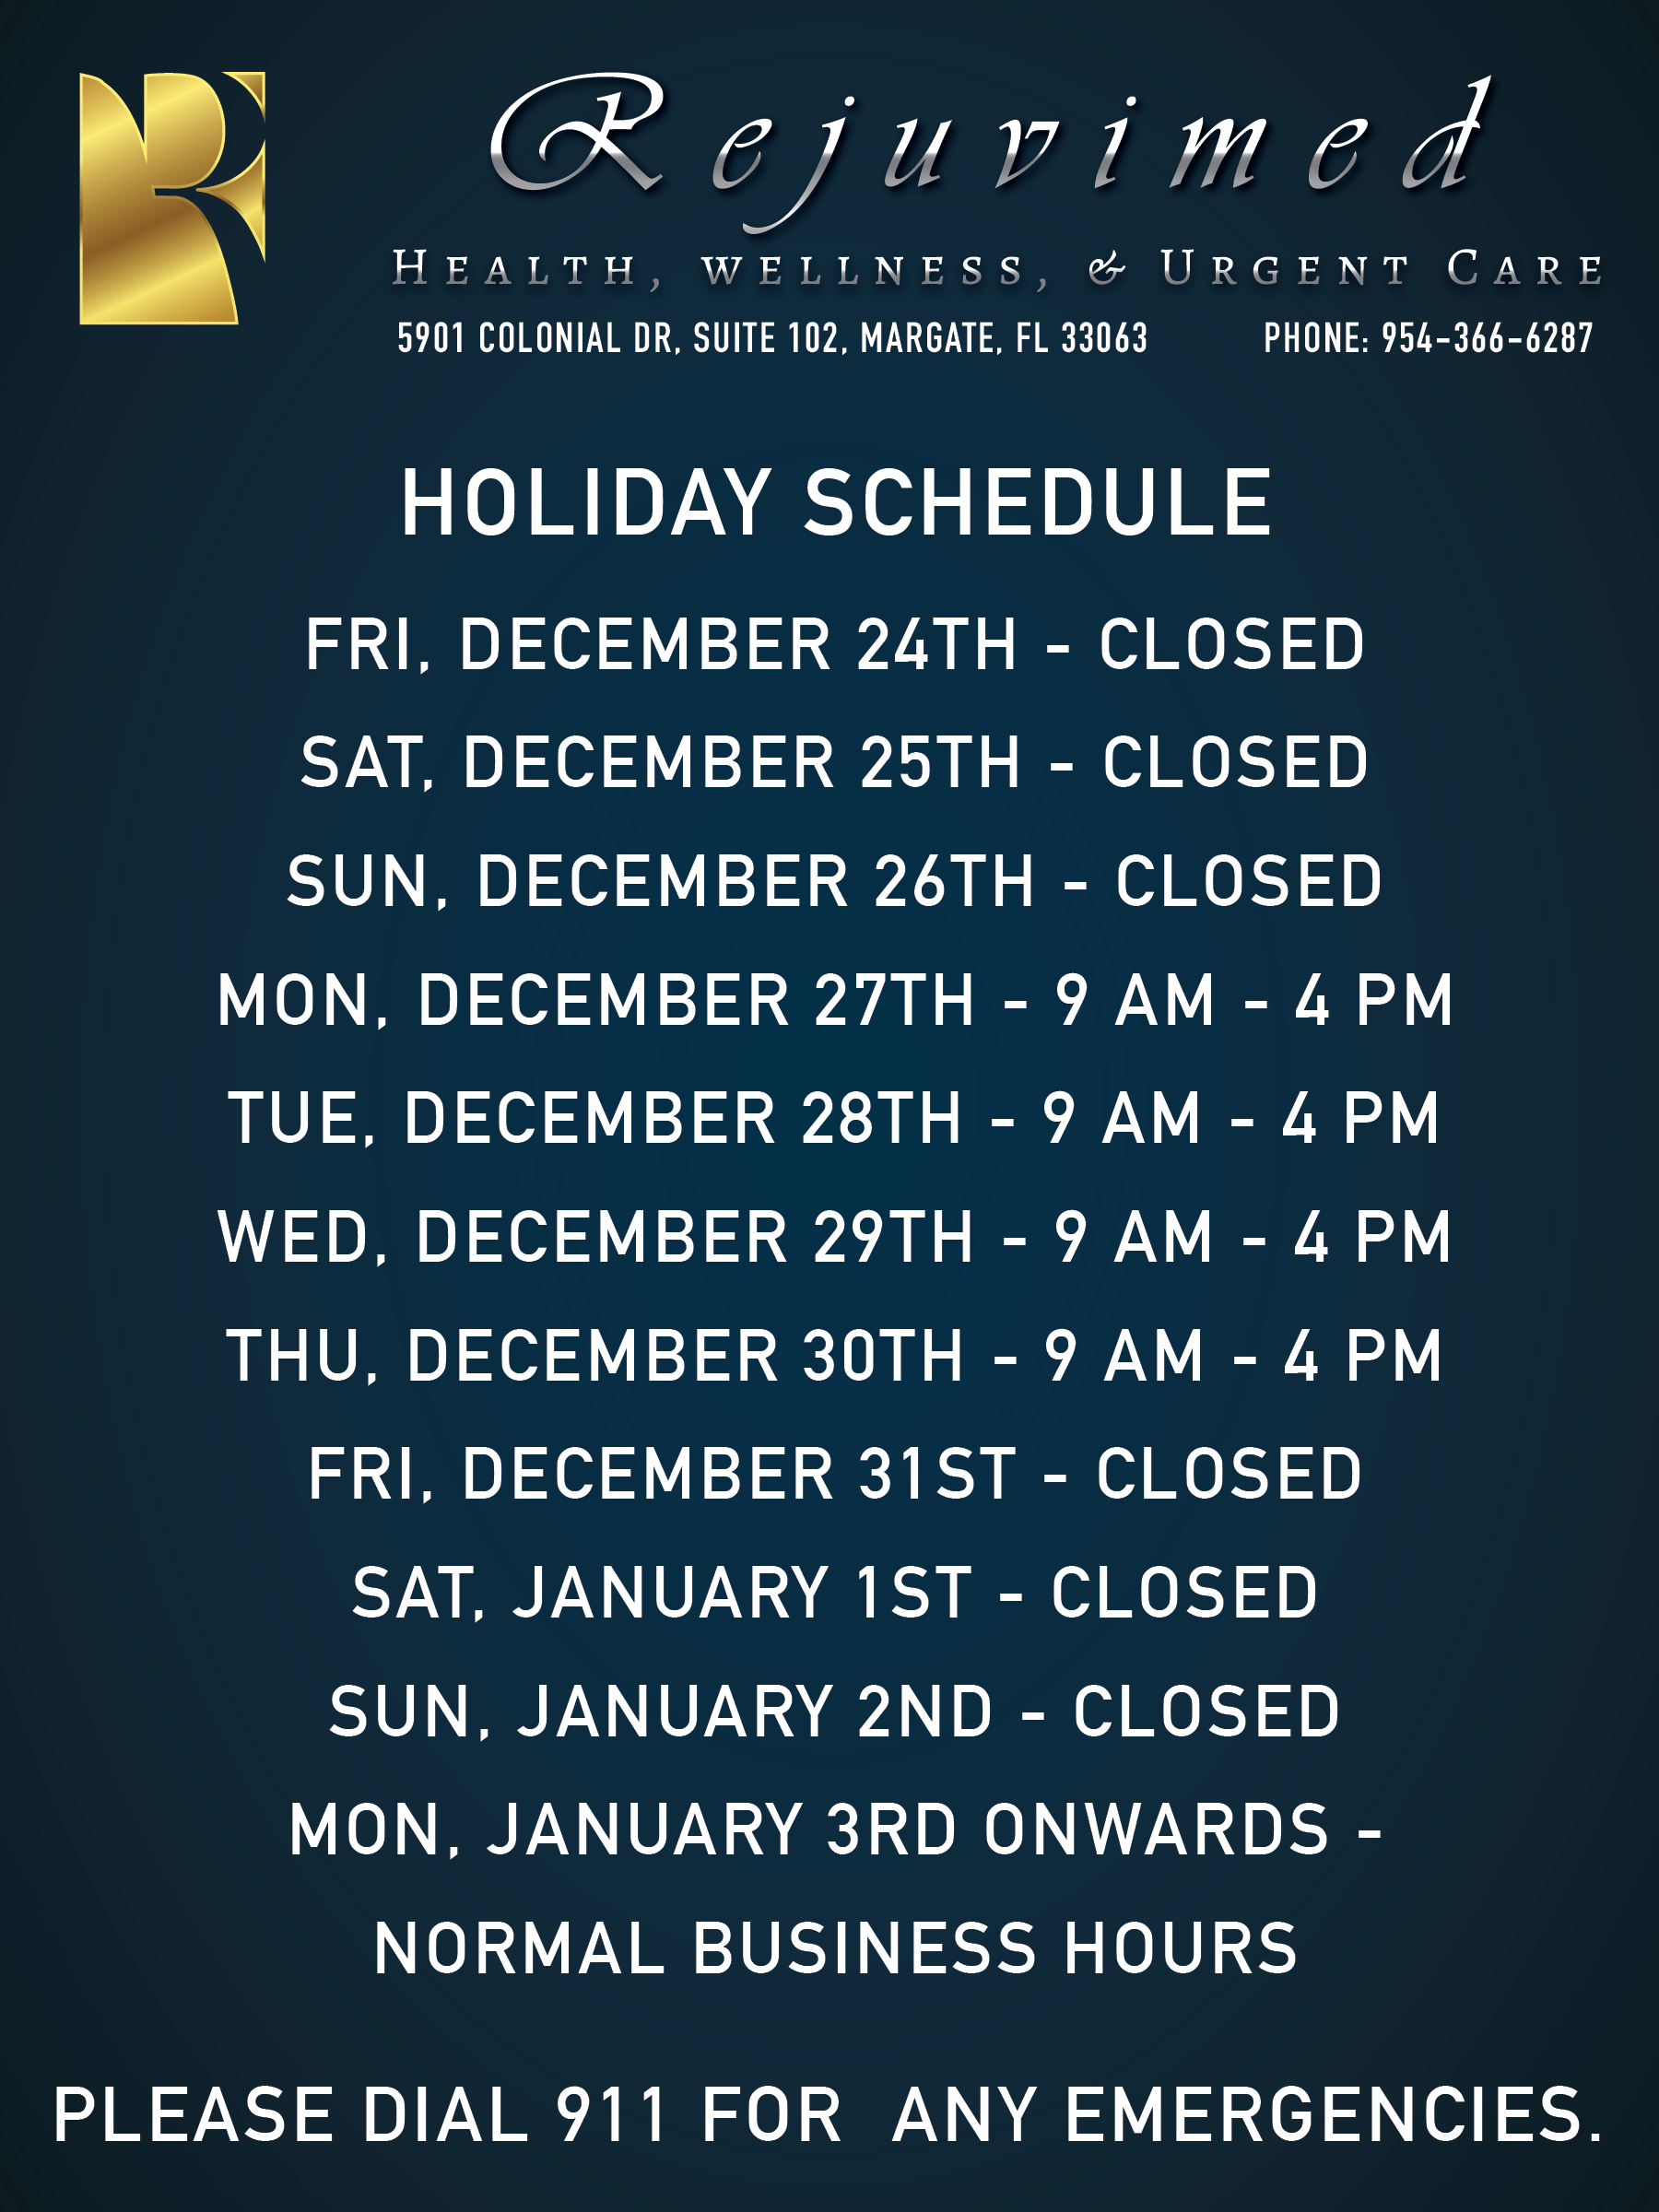 Rejuvimed Holiday Schedule 2021